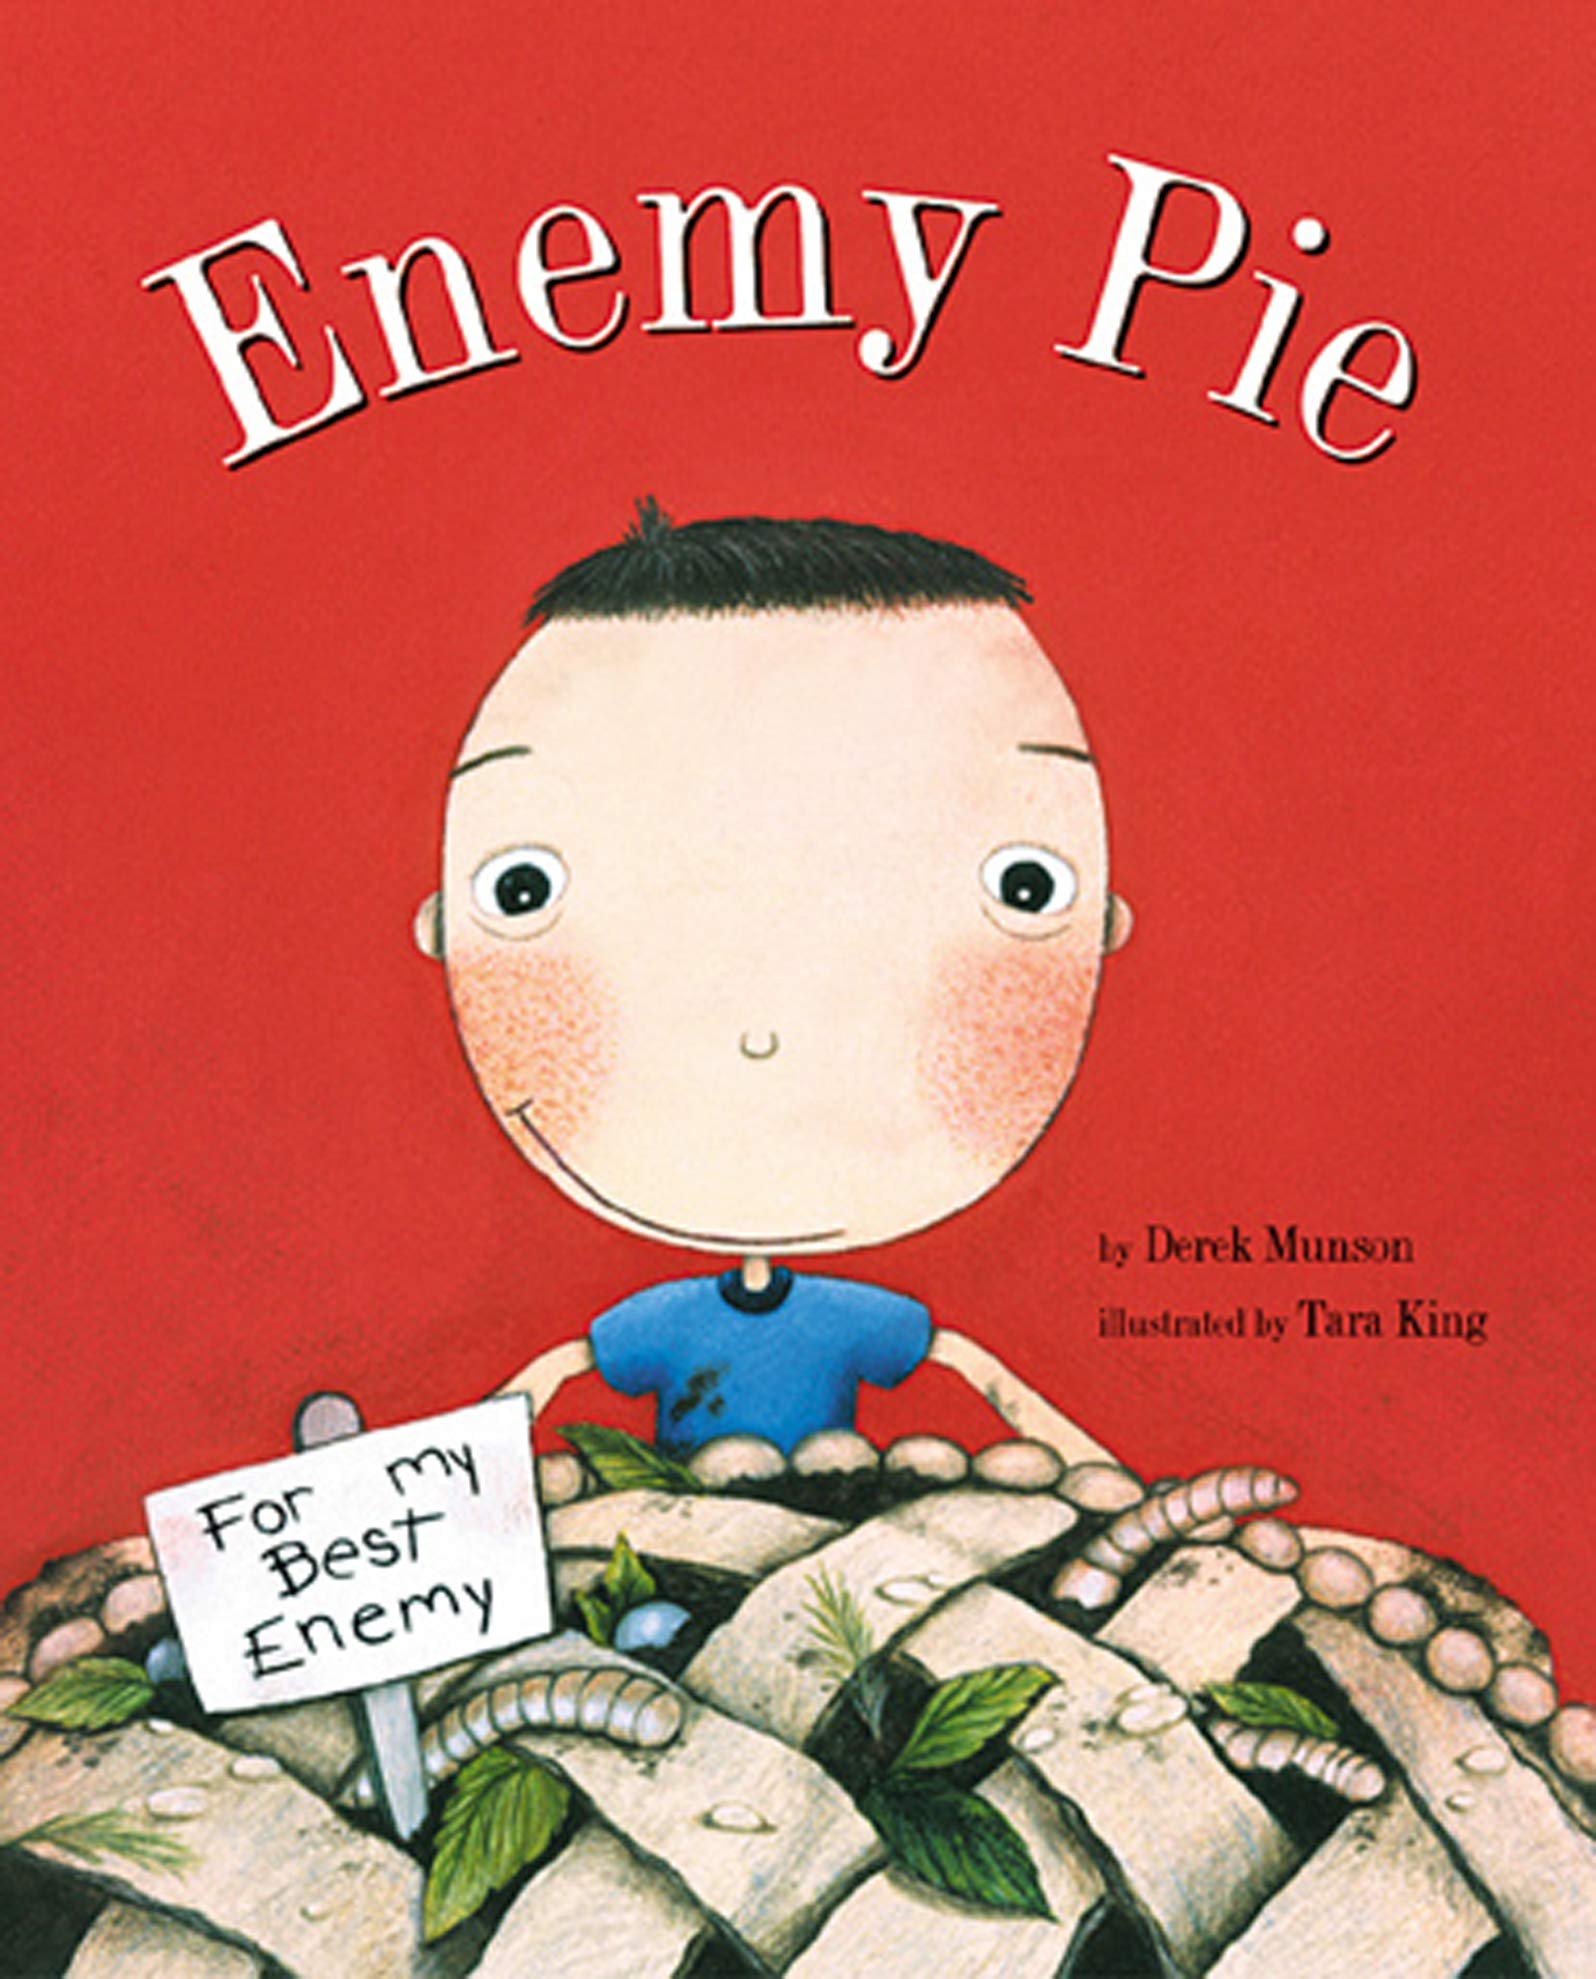 speech and language teaching concepts for Enemy Pie in speech therapy